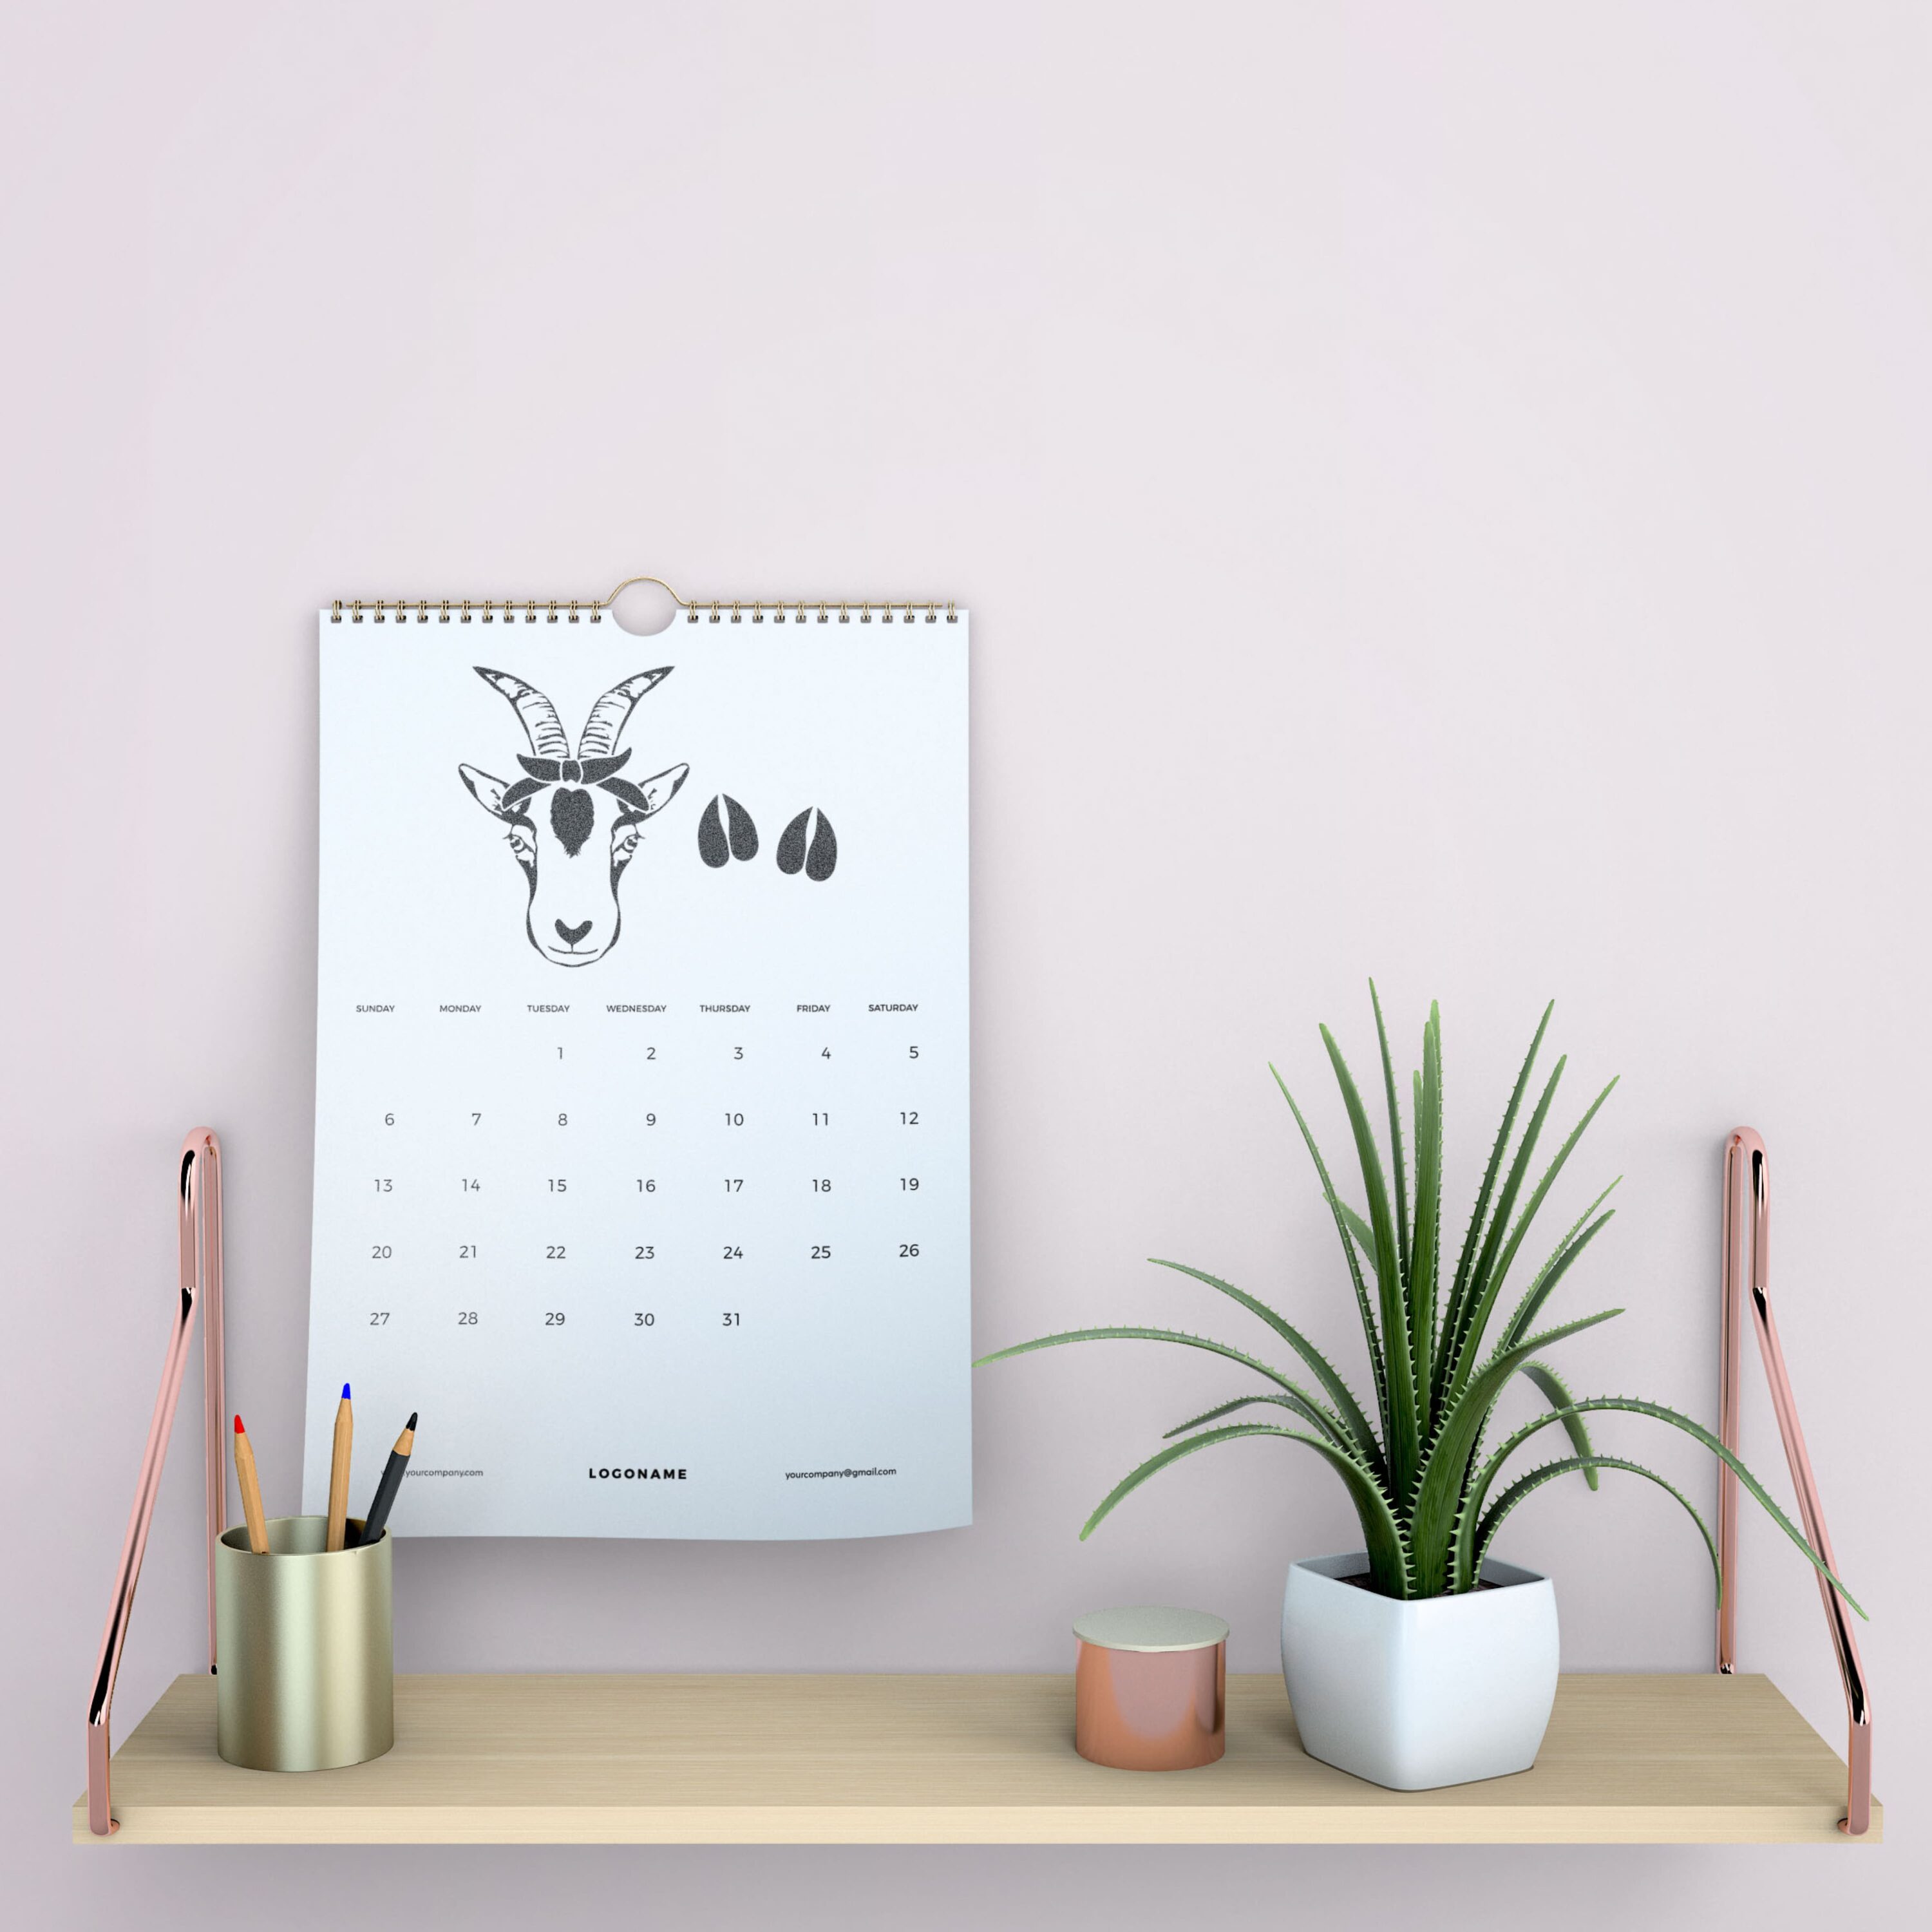 Desk with a calendar and a potted plant.